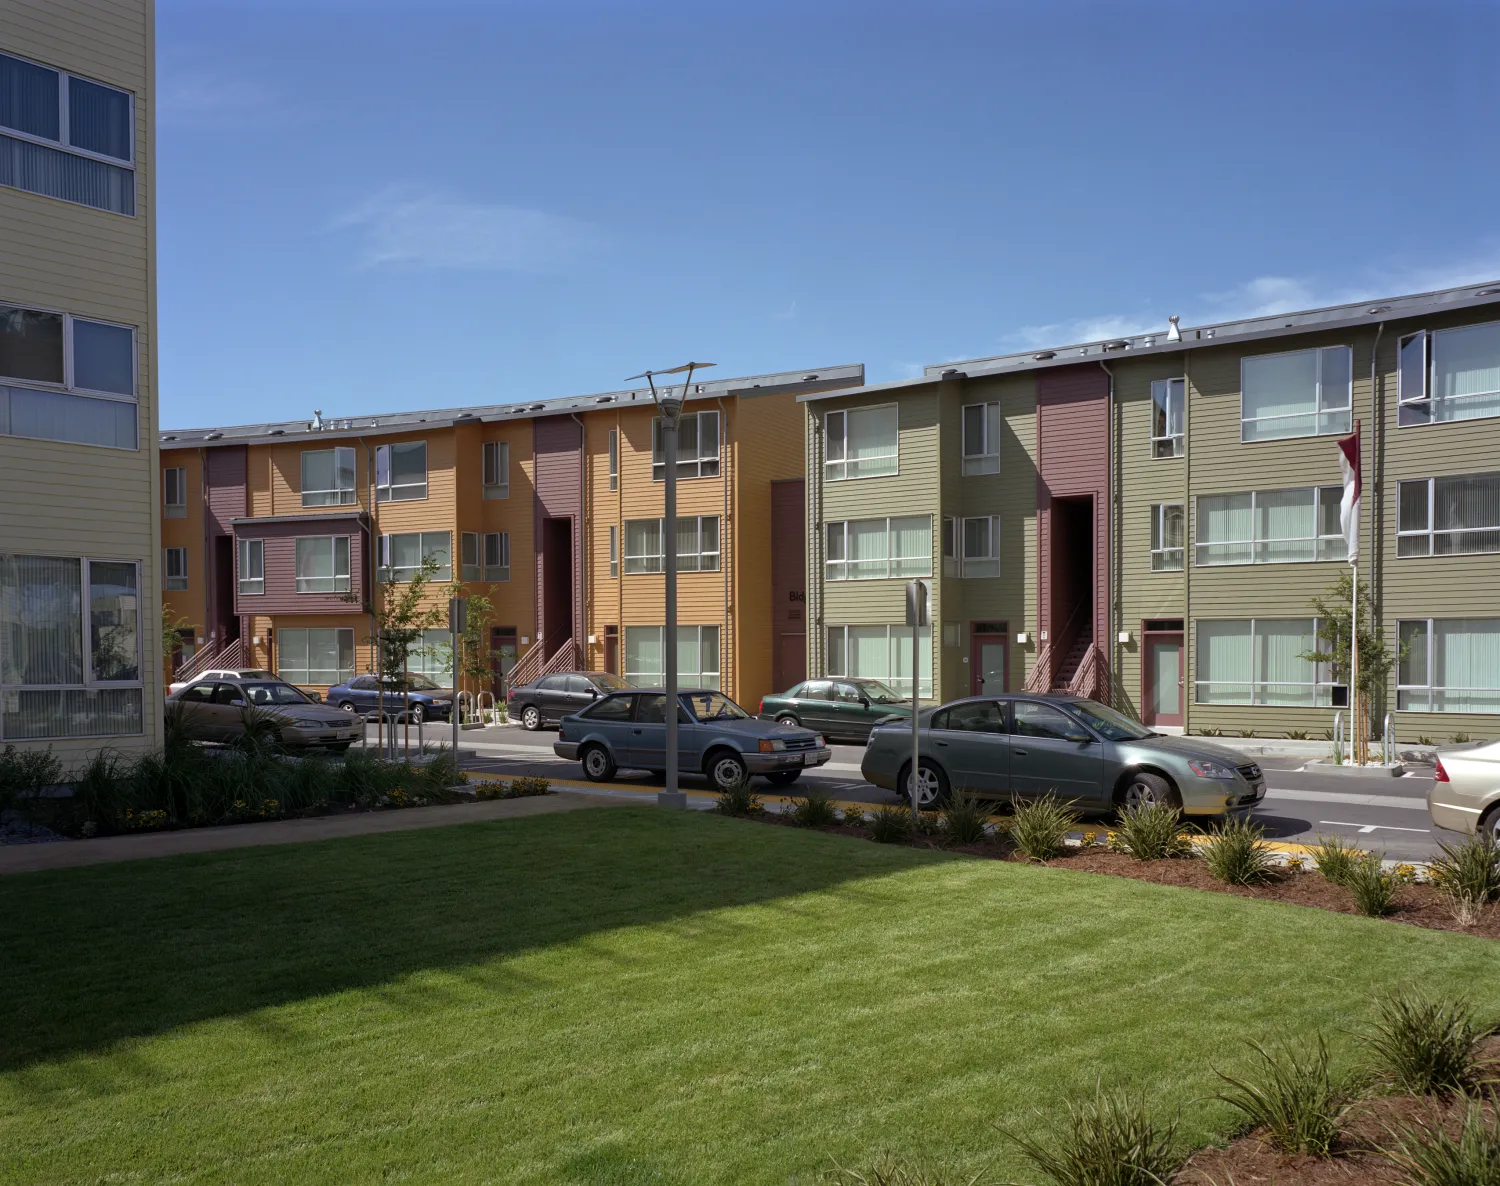 View of the townhomes at Crescent Cove in San Francisco.